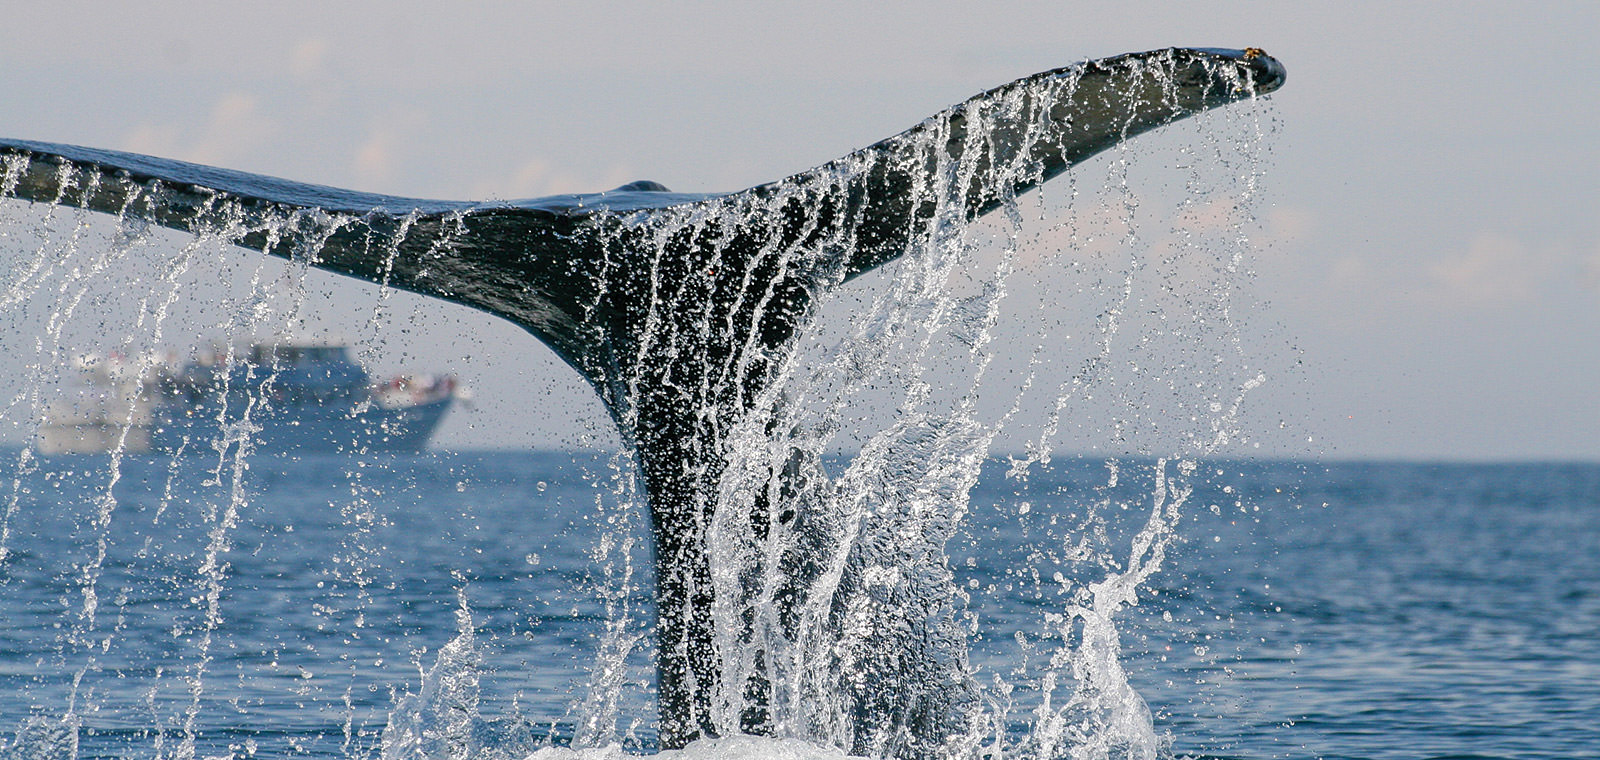 whale tail breaching, whale watching boat in the background